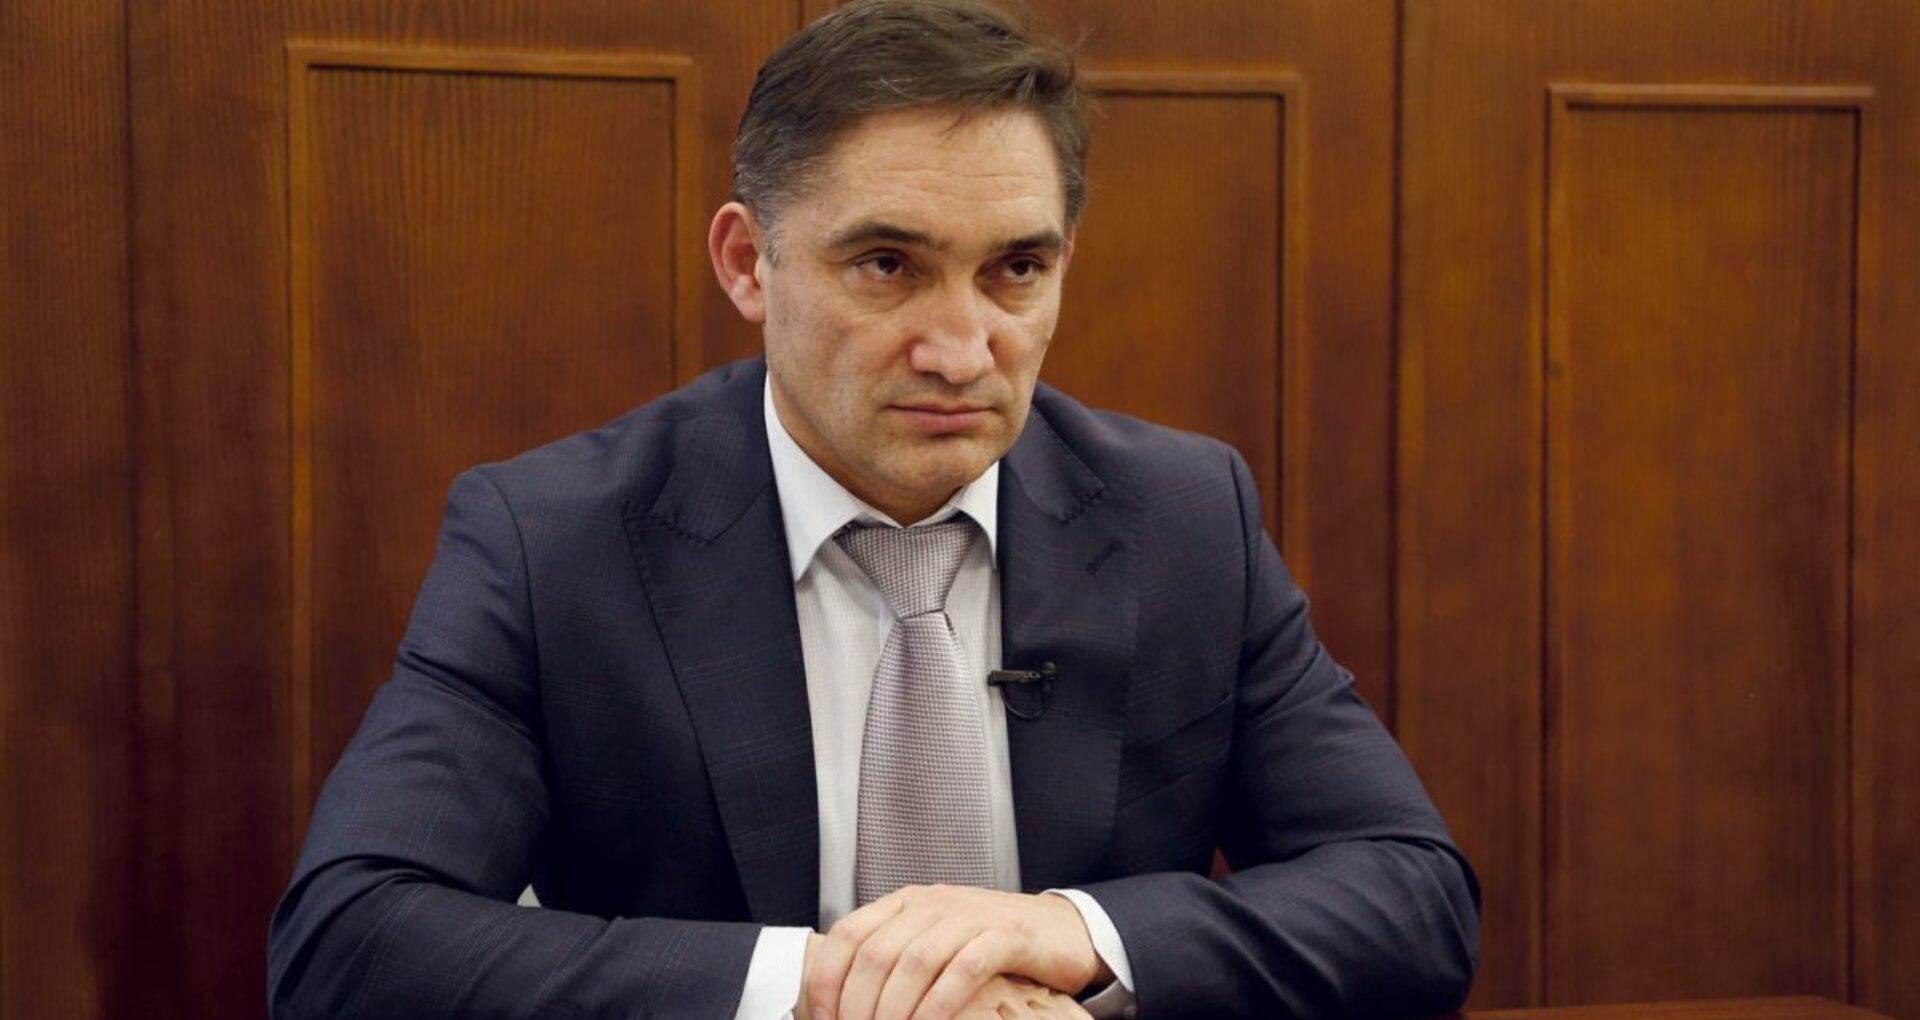 The fate of Stoianoglo’s dismissal as Prosecutor General will be decided by the Constitutional Court. The Chisinau Court of Appeal has admitted the request of lawyers who challenged the constitutionality of an article of the Law on the Prosecutor’s Office